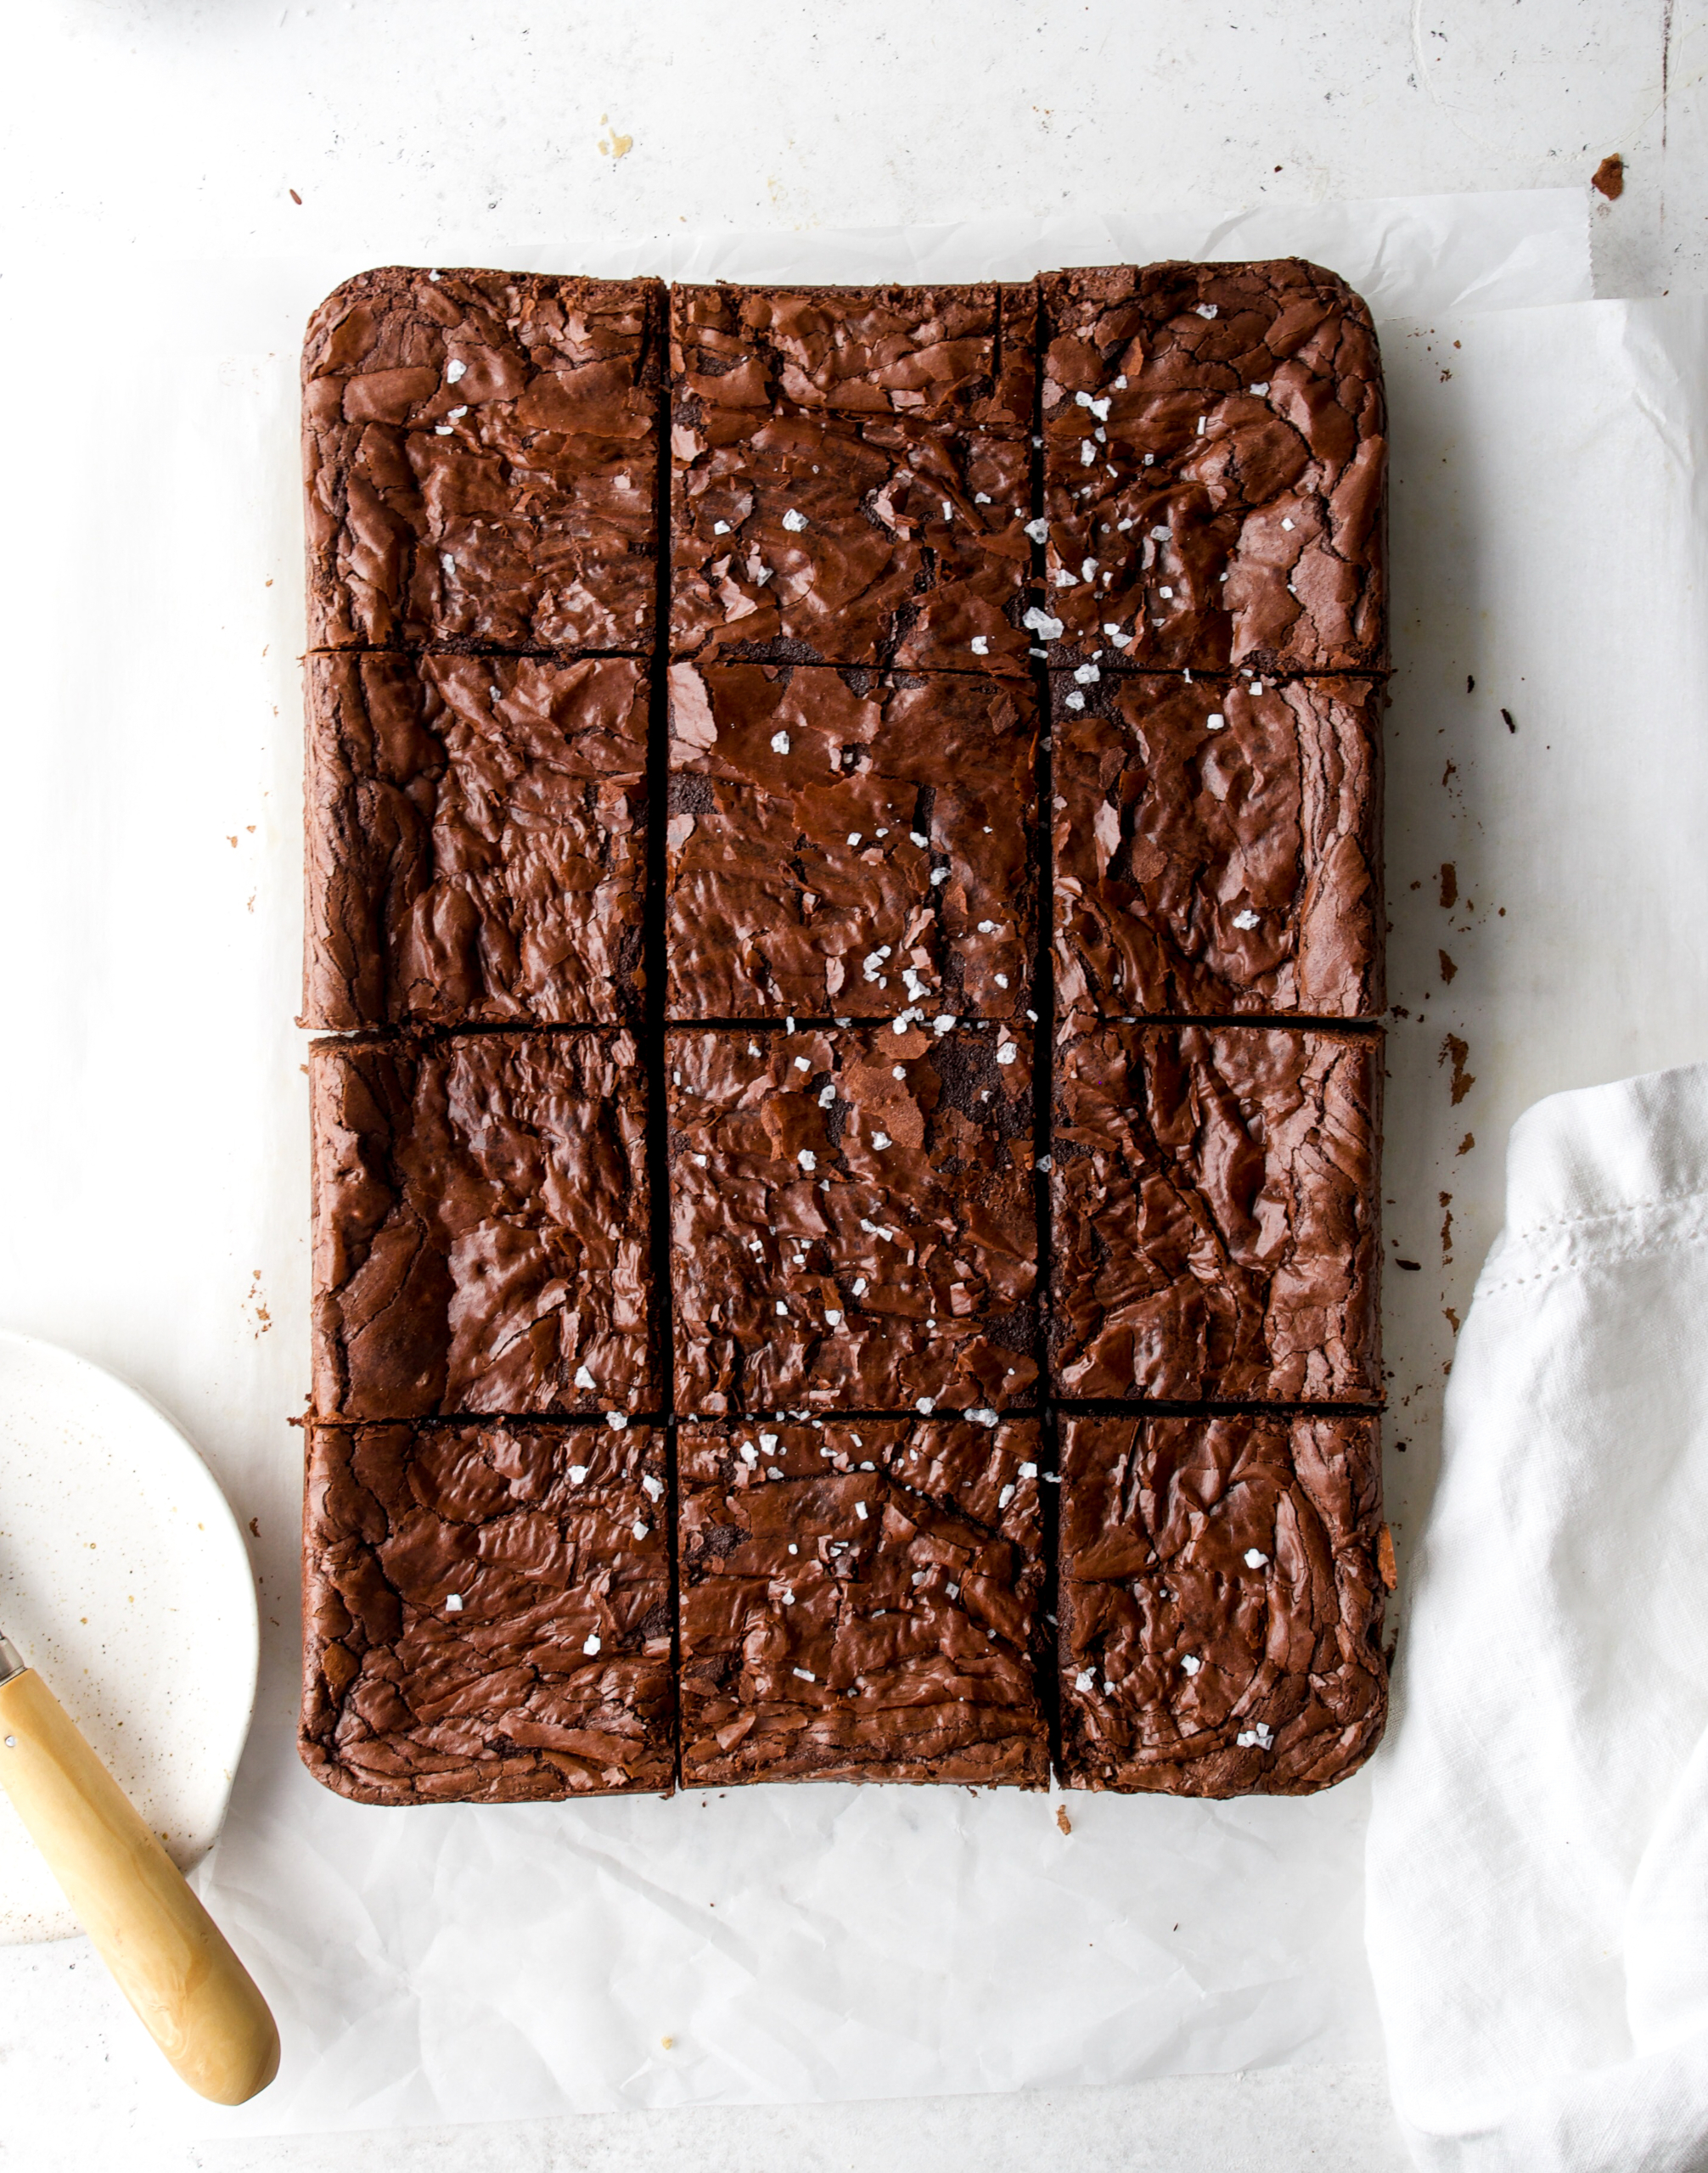 Brownies cut into 12 giant brownie slices.